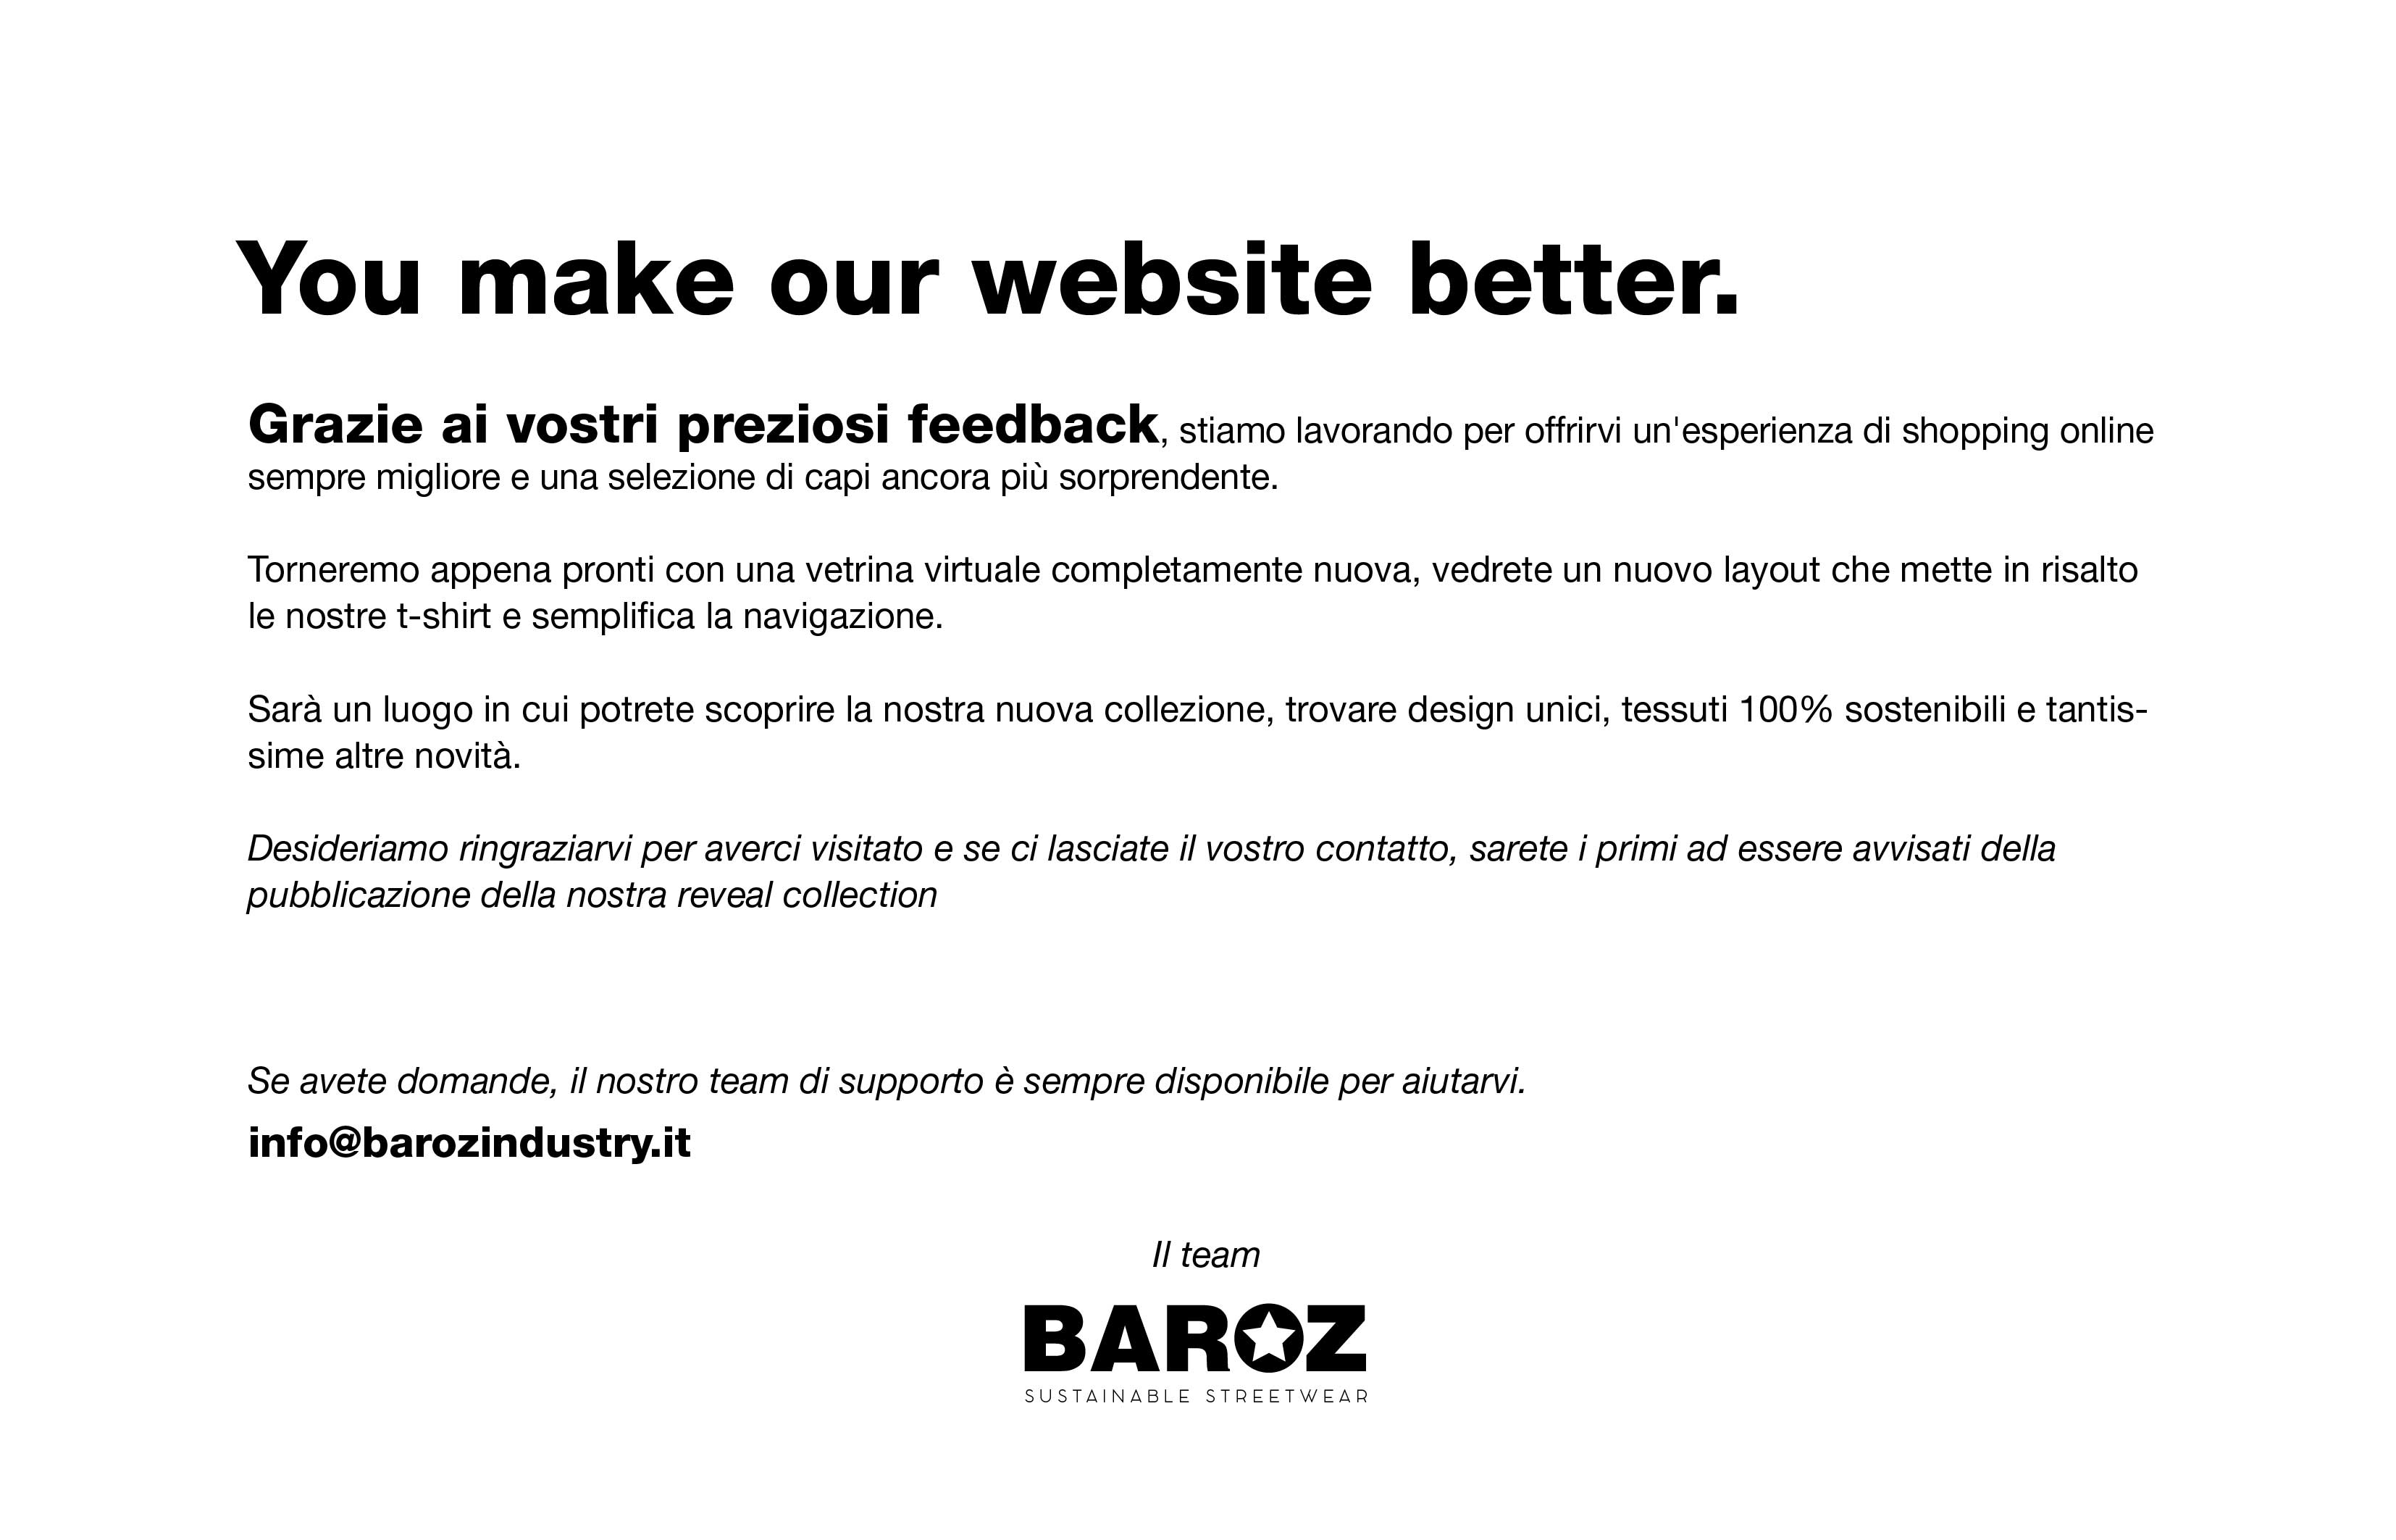 You make our website better.